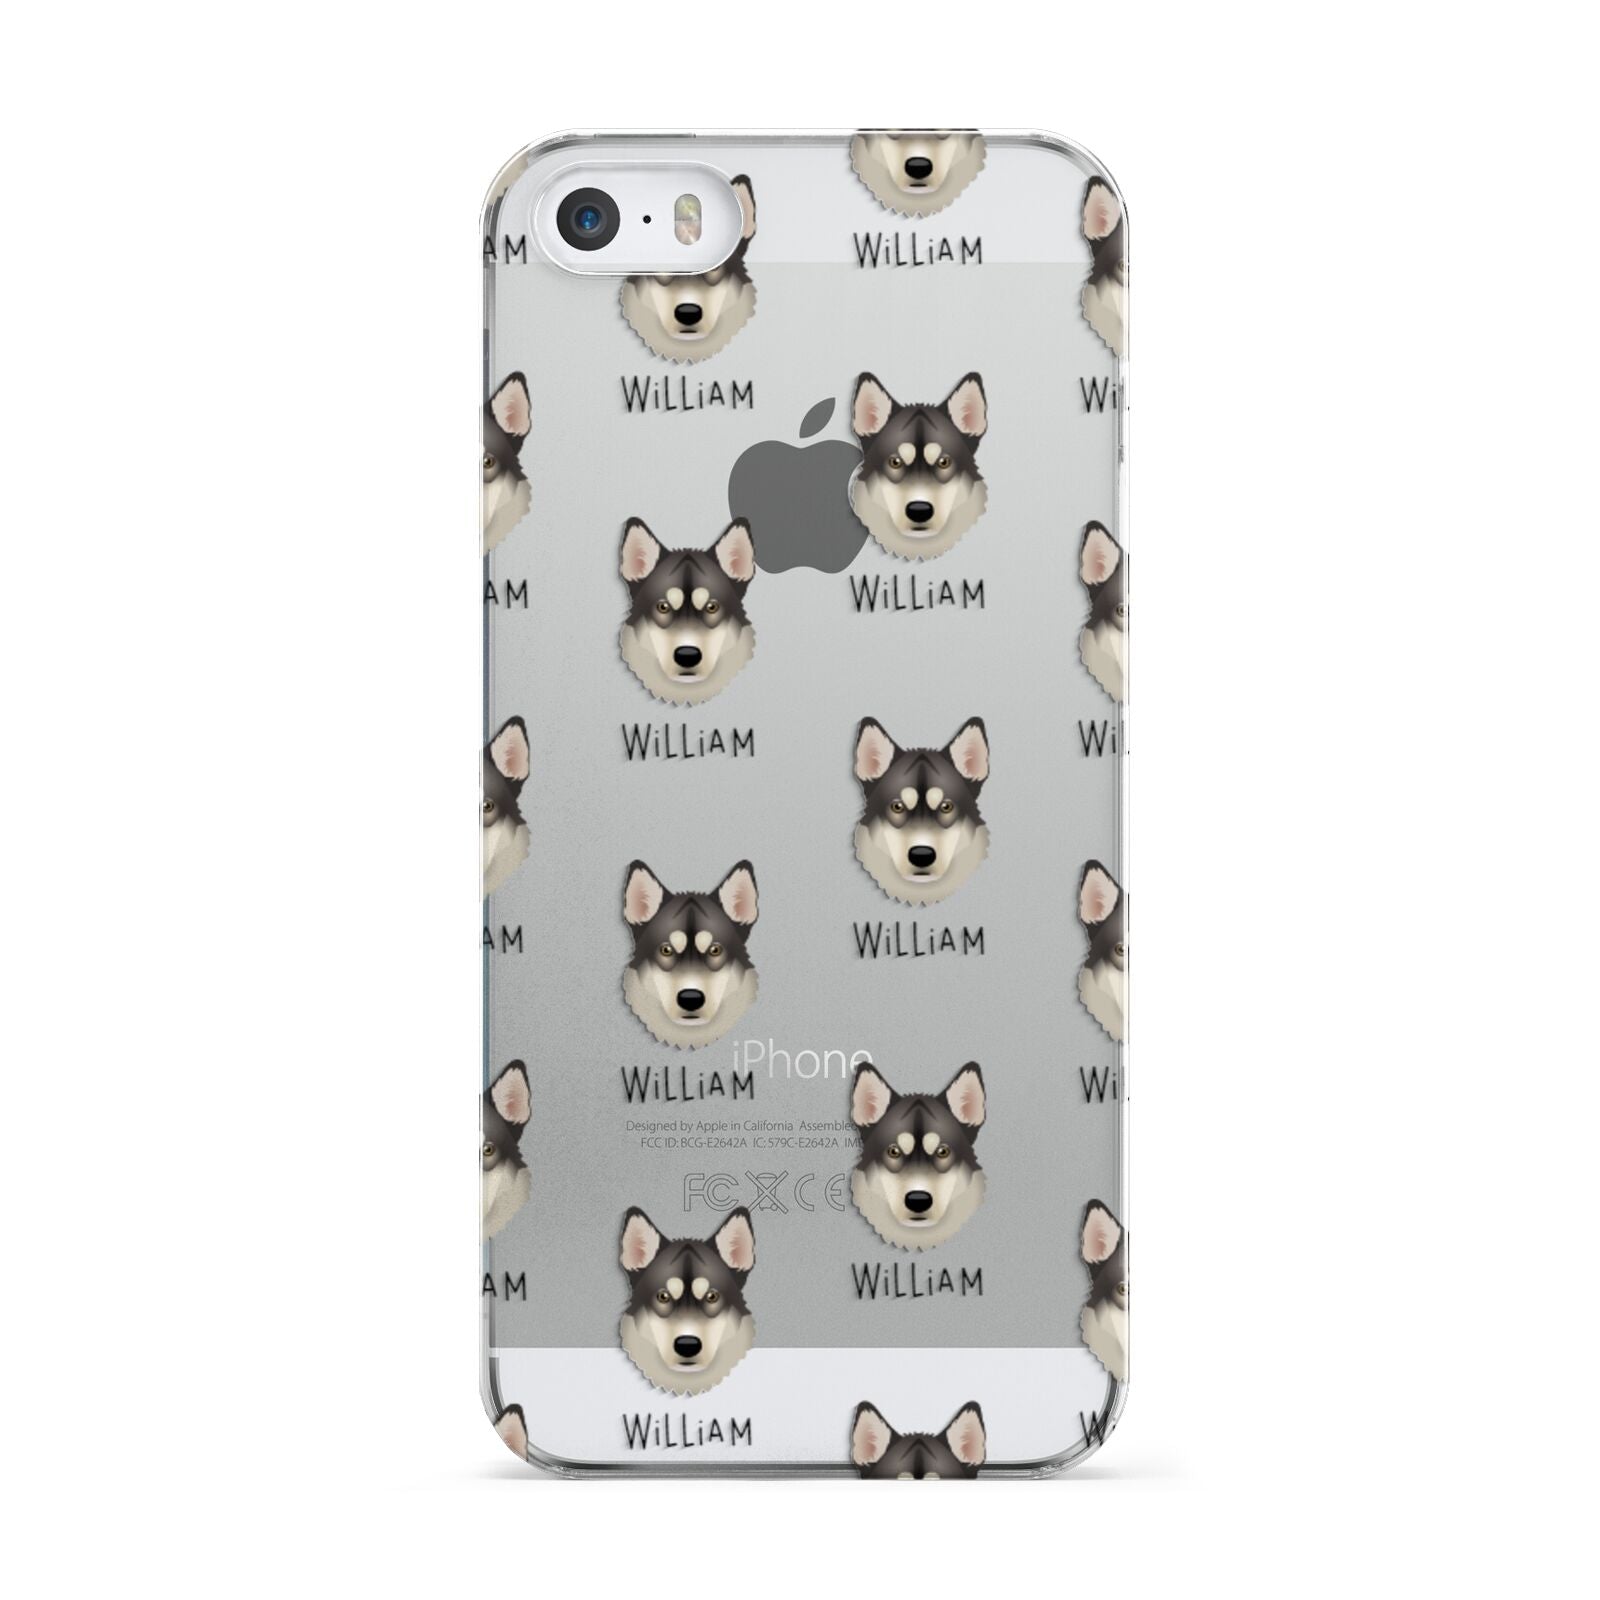 Tamaskan Icon with Name Apple iPhone 5 Case